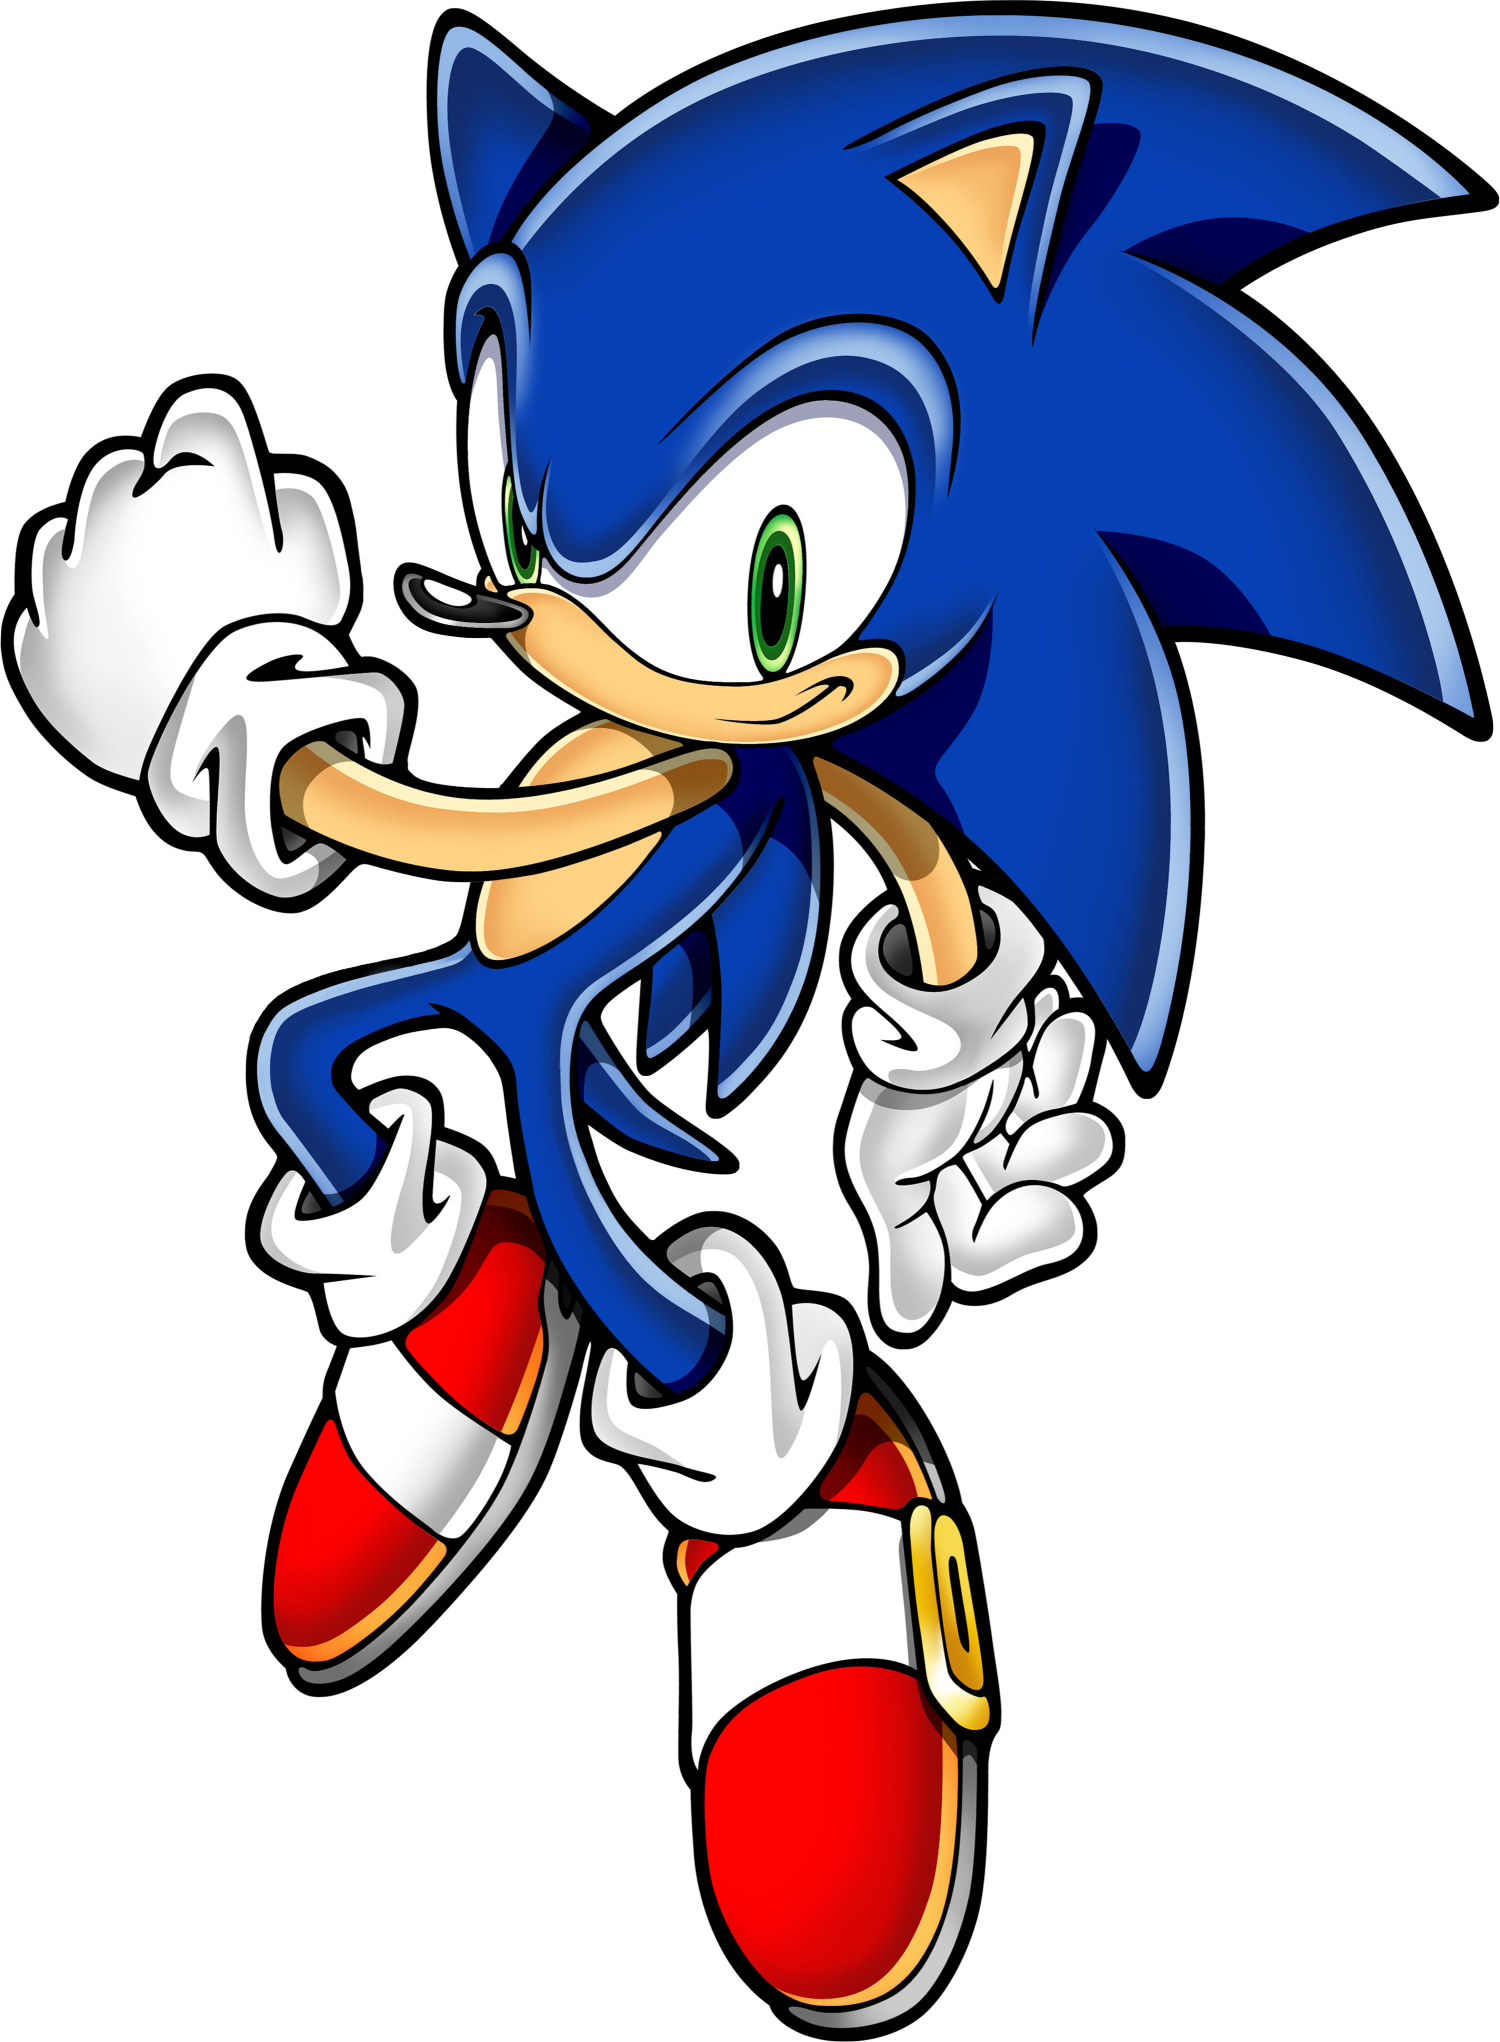 Sonic The Hedgehog PNG - 171542